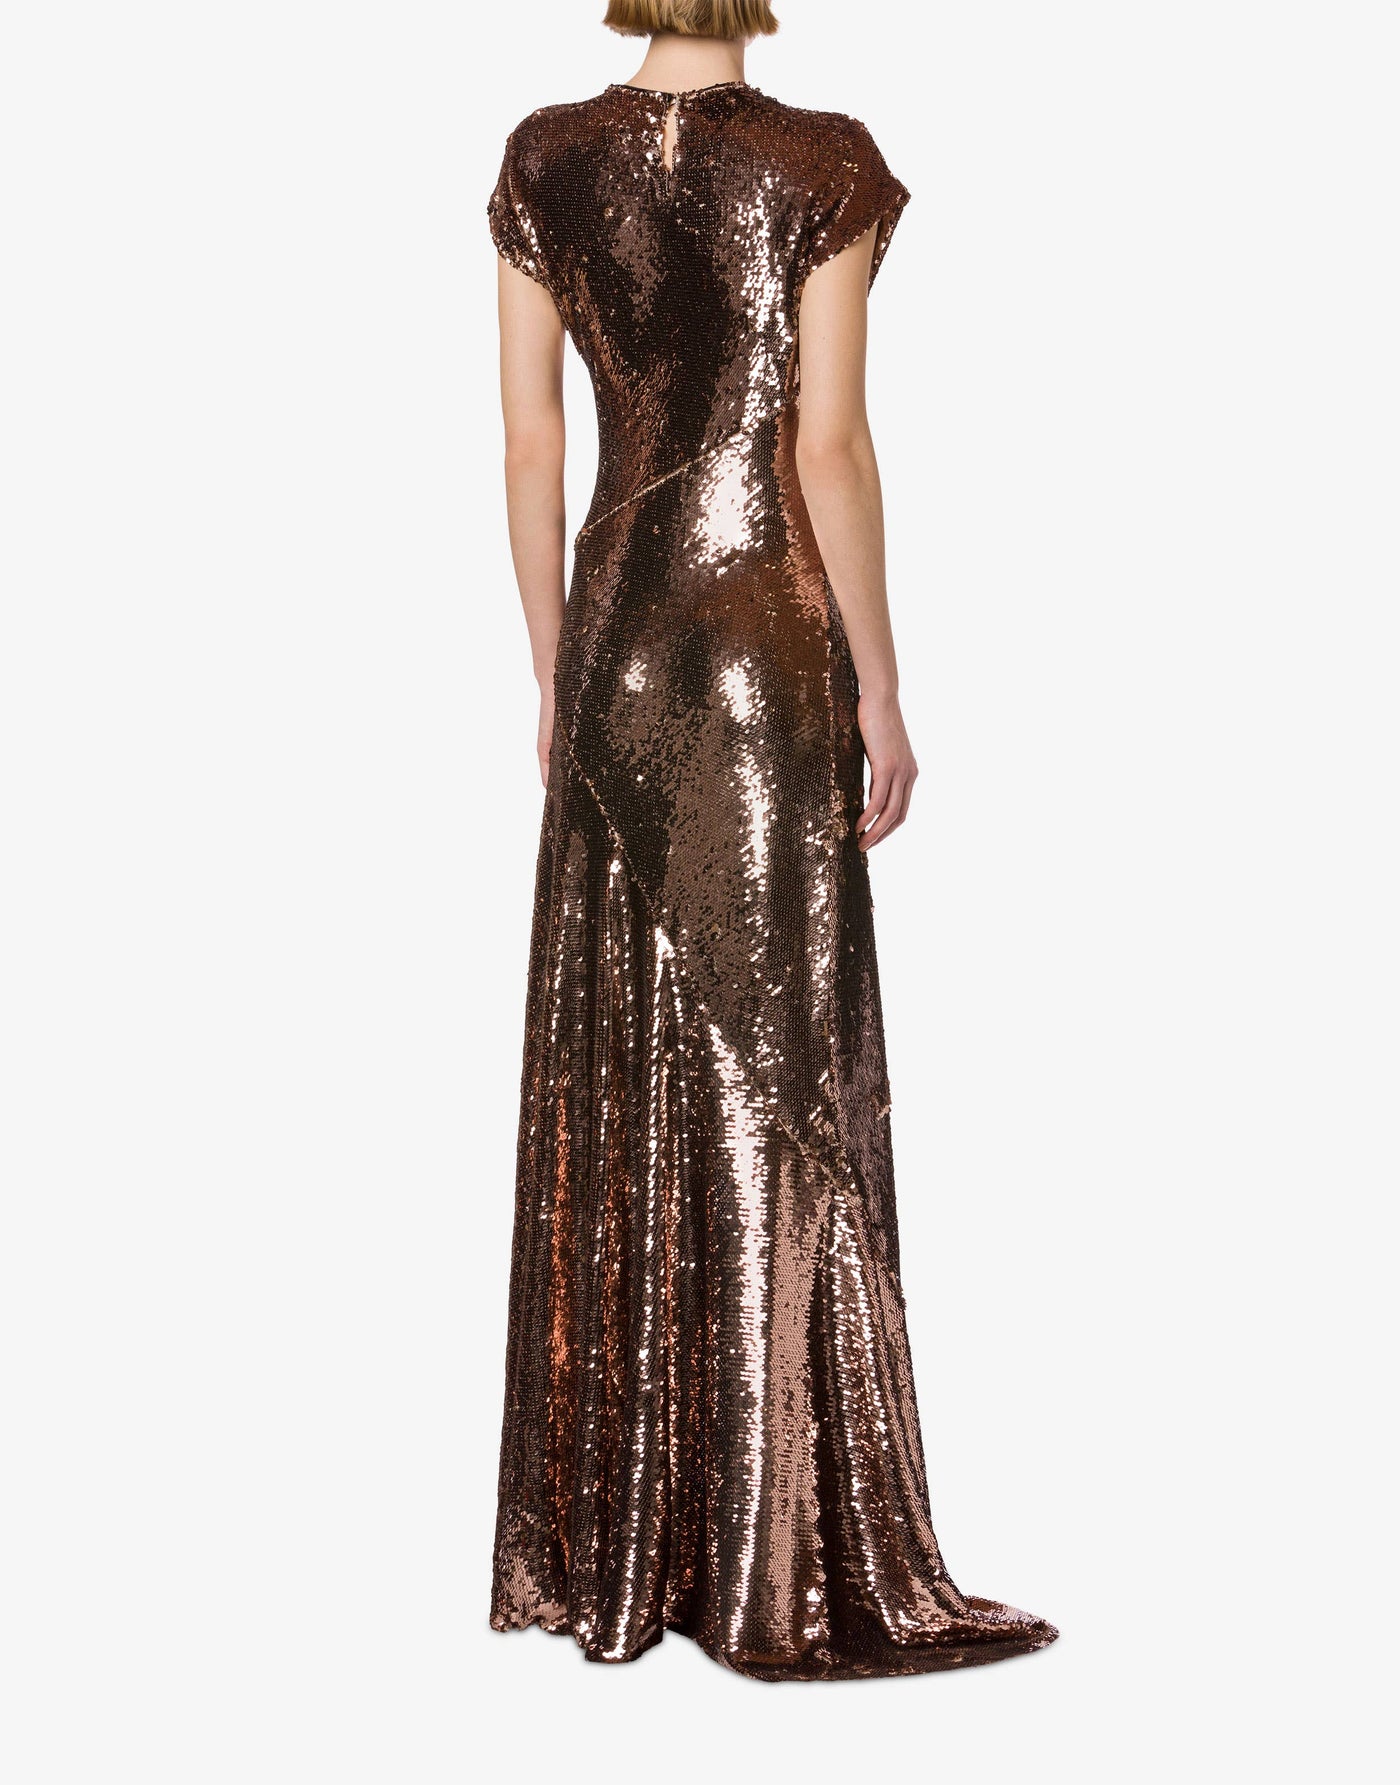 Sequin dress with slit